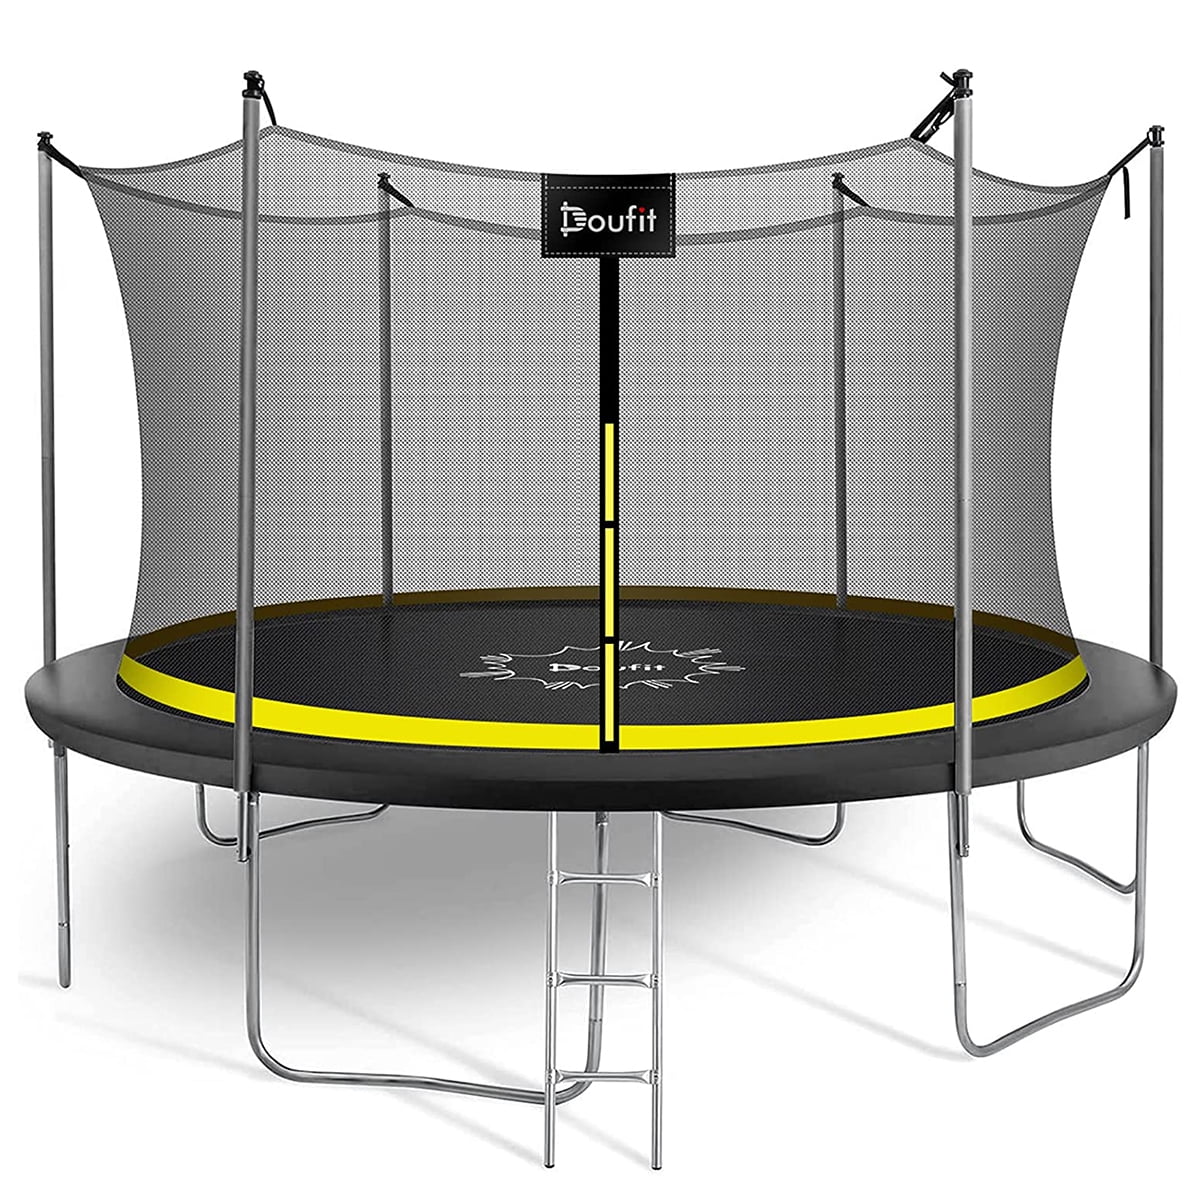 Doufit 12FT with Enclosure Net and Ladder, Family Outdoor Yard Jump Recreational Trampoline for Kids & Adults - Walmart.com